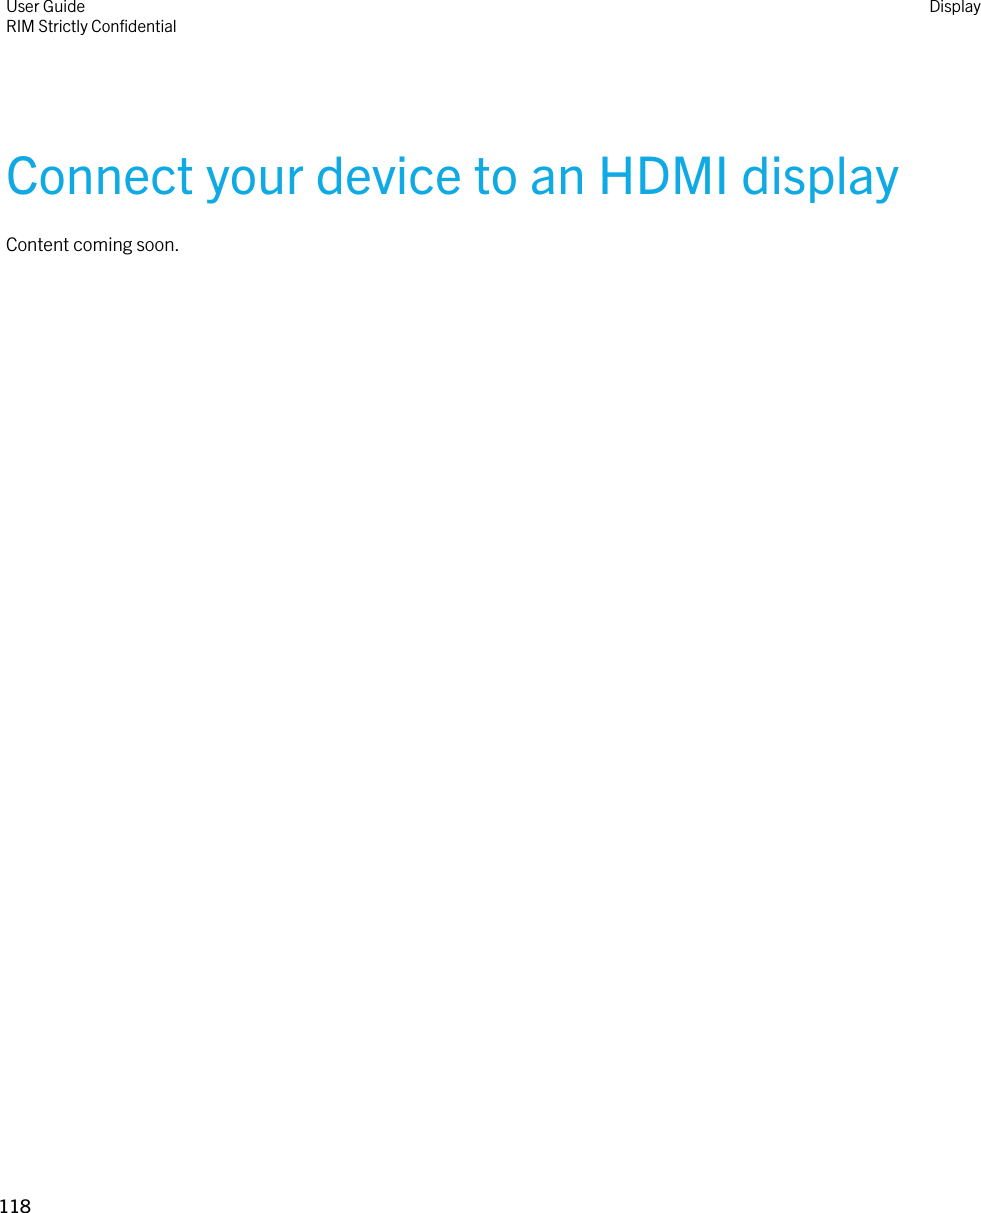 Connect your device to an HDMI displayContent coming soon.User GuideRIM Strictly ConfidentialDisplay118 